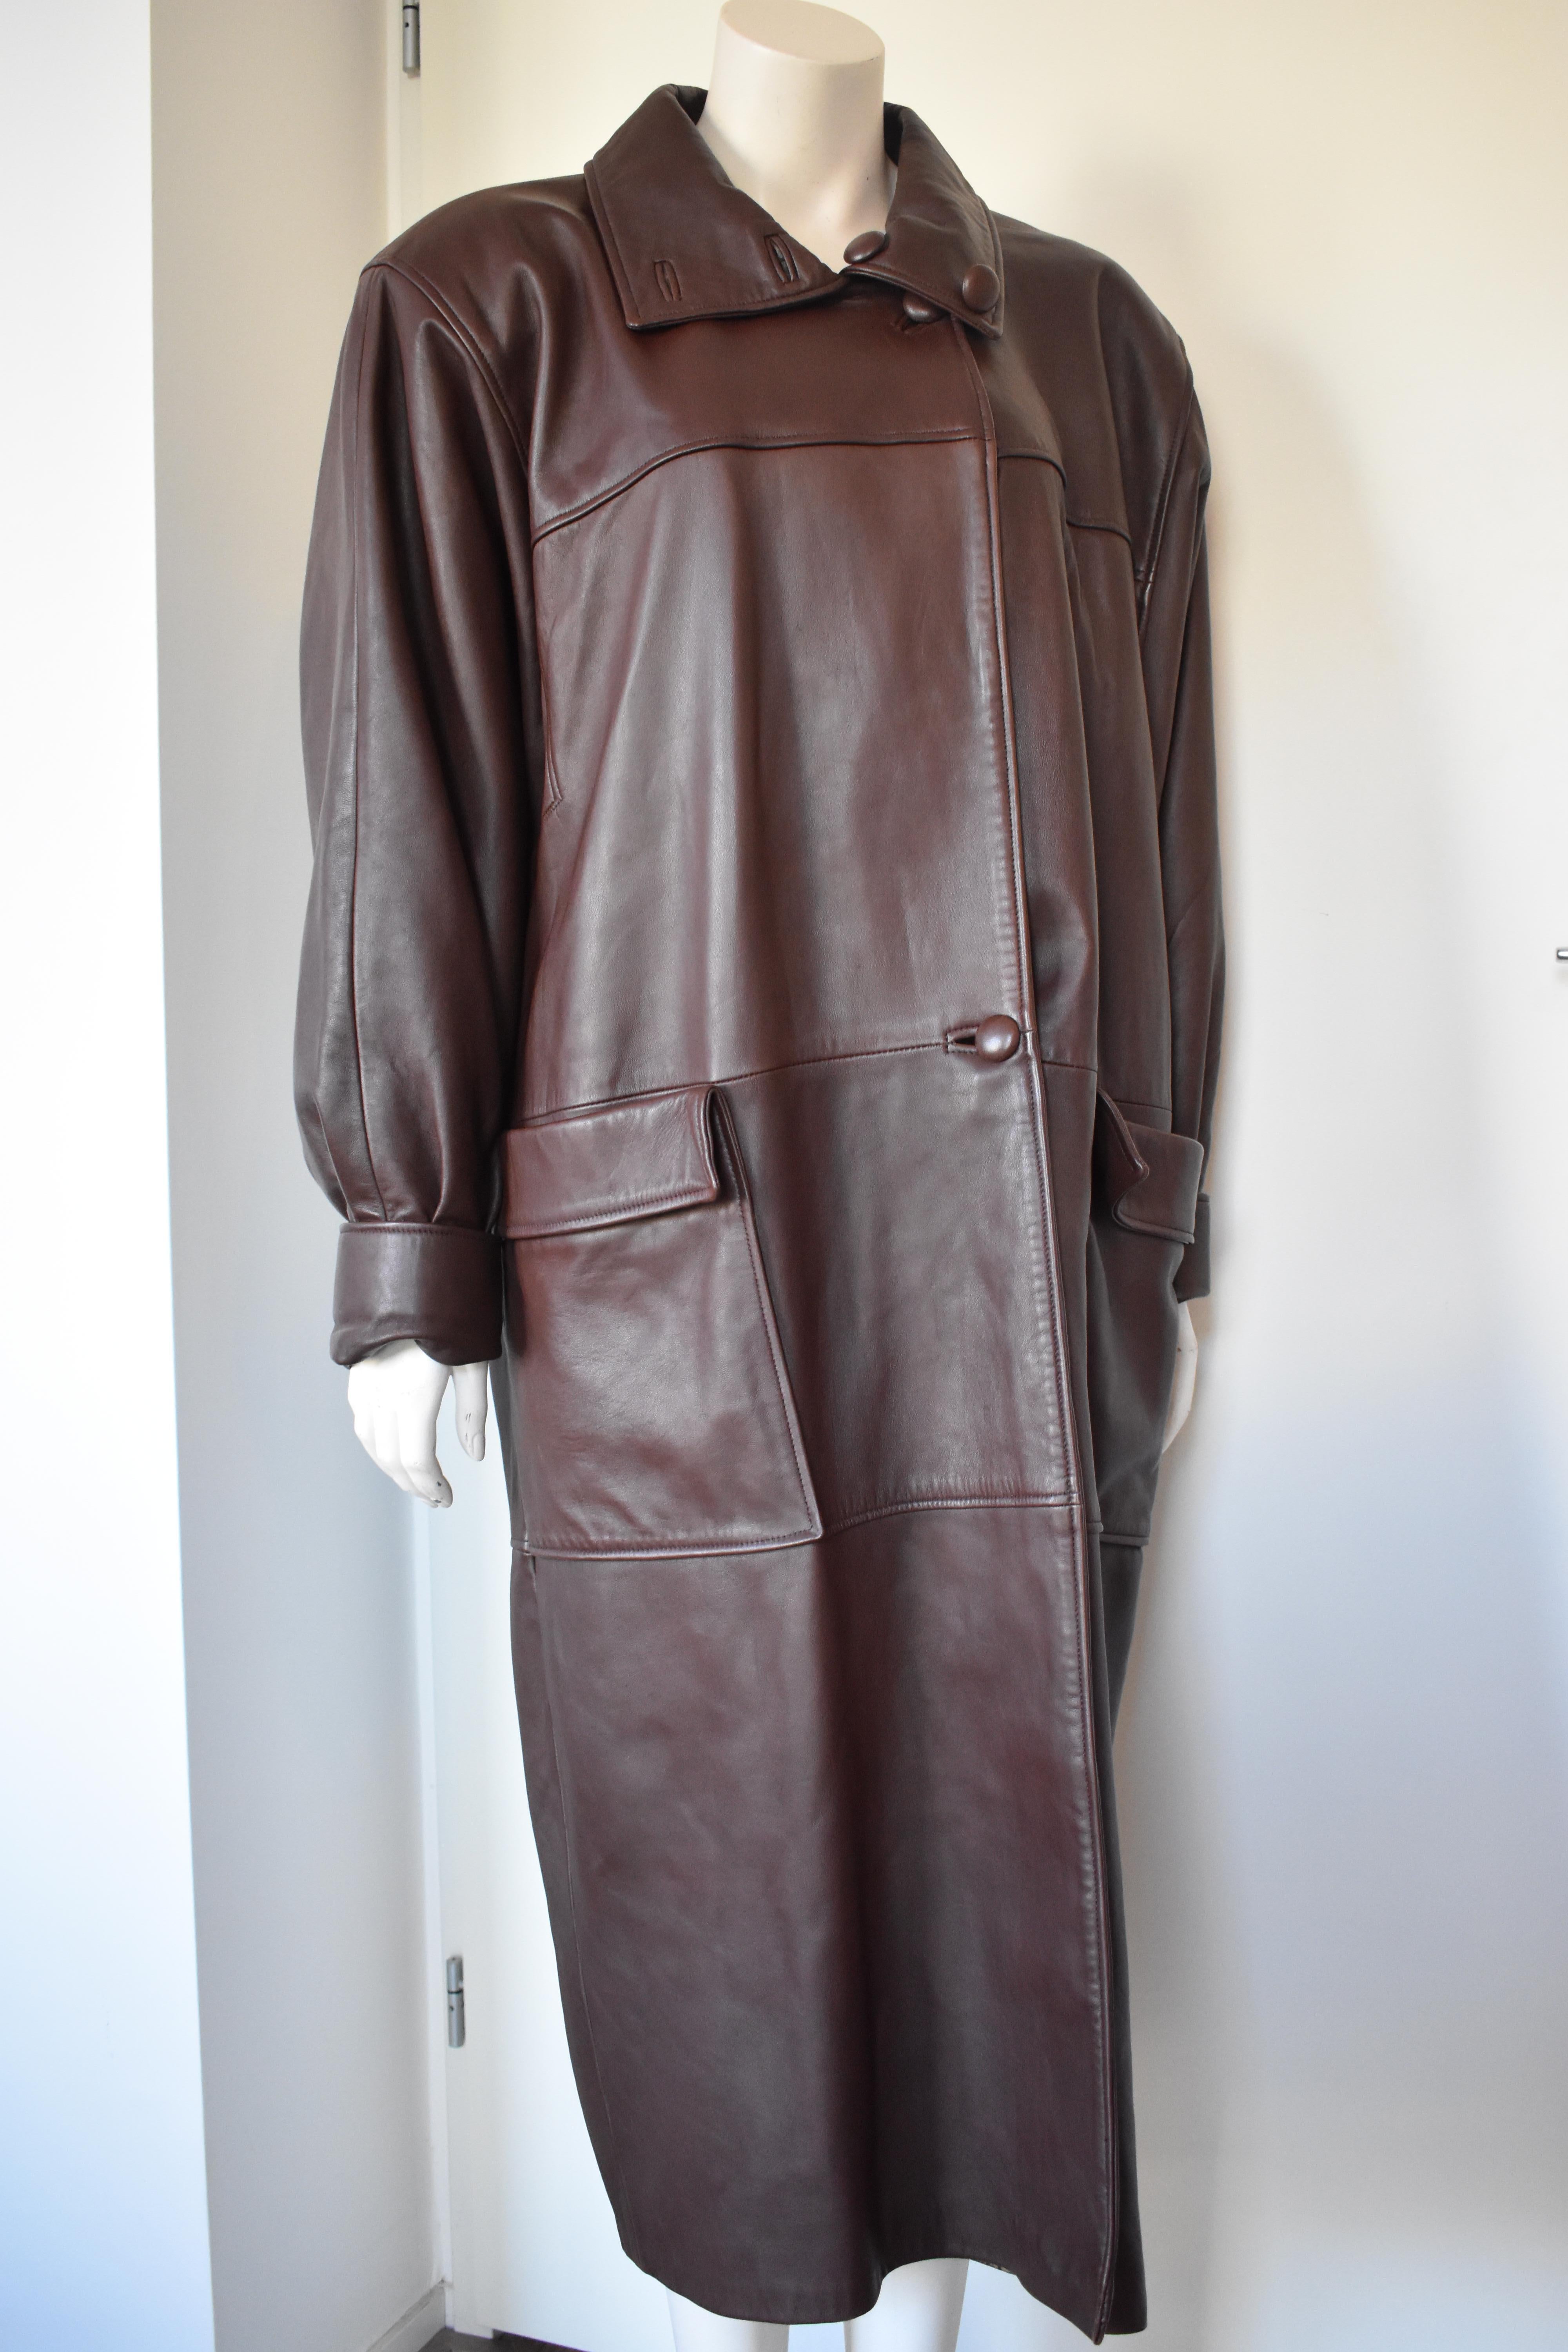 Chocolate Brown Leather Coat by Carven Paris 1